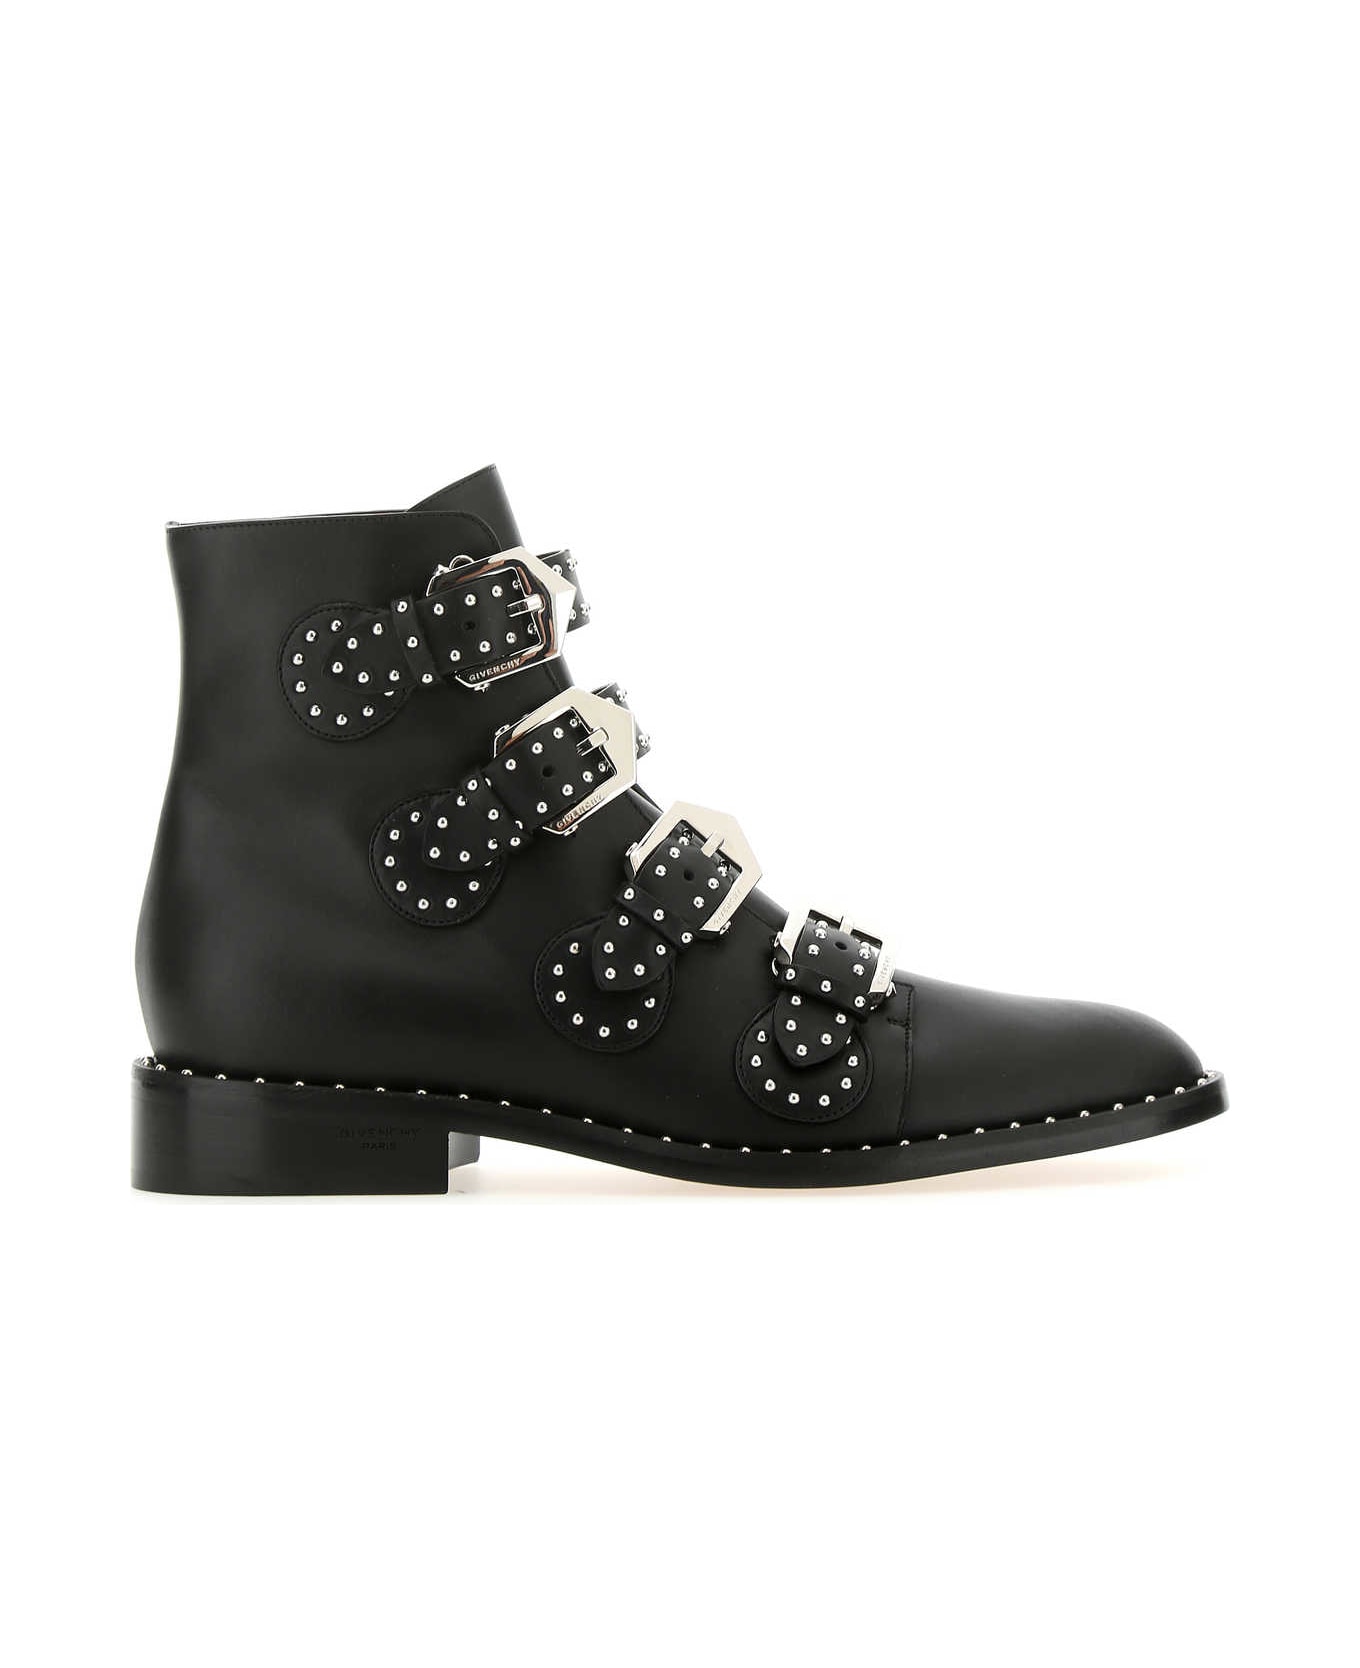 Givenchy Black Leather Ankle Boots - 001 ブーツ